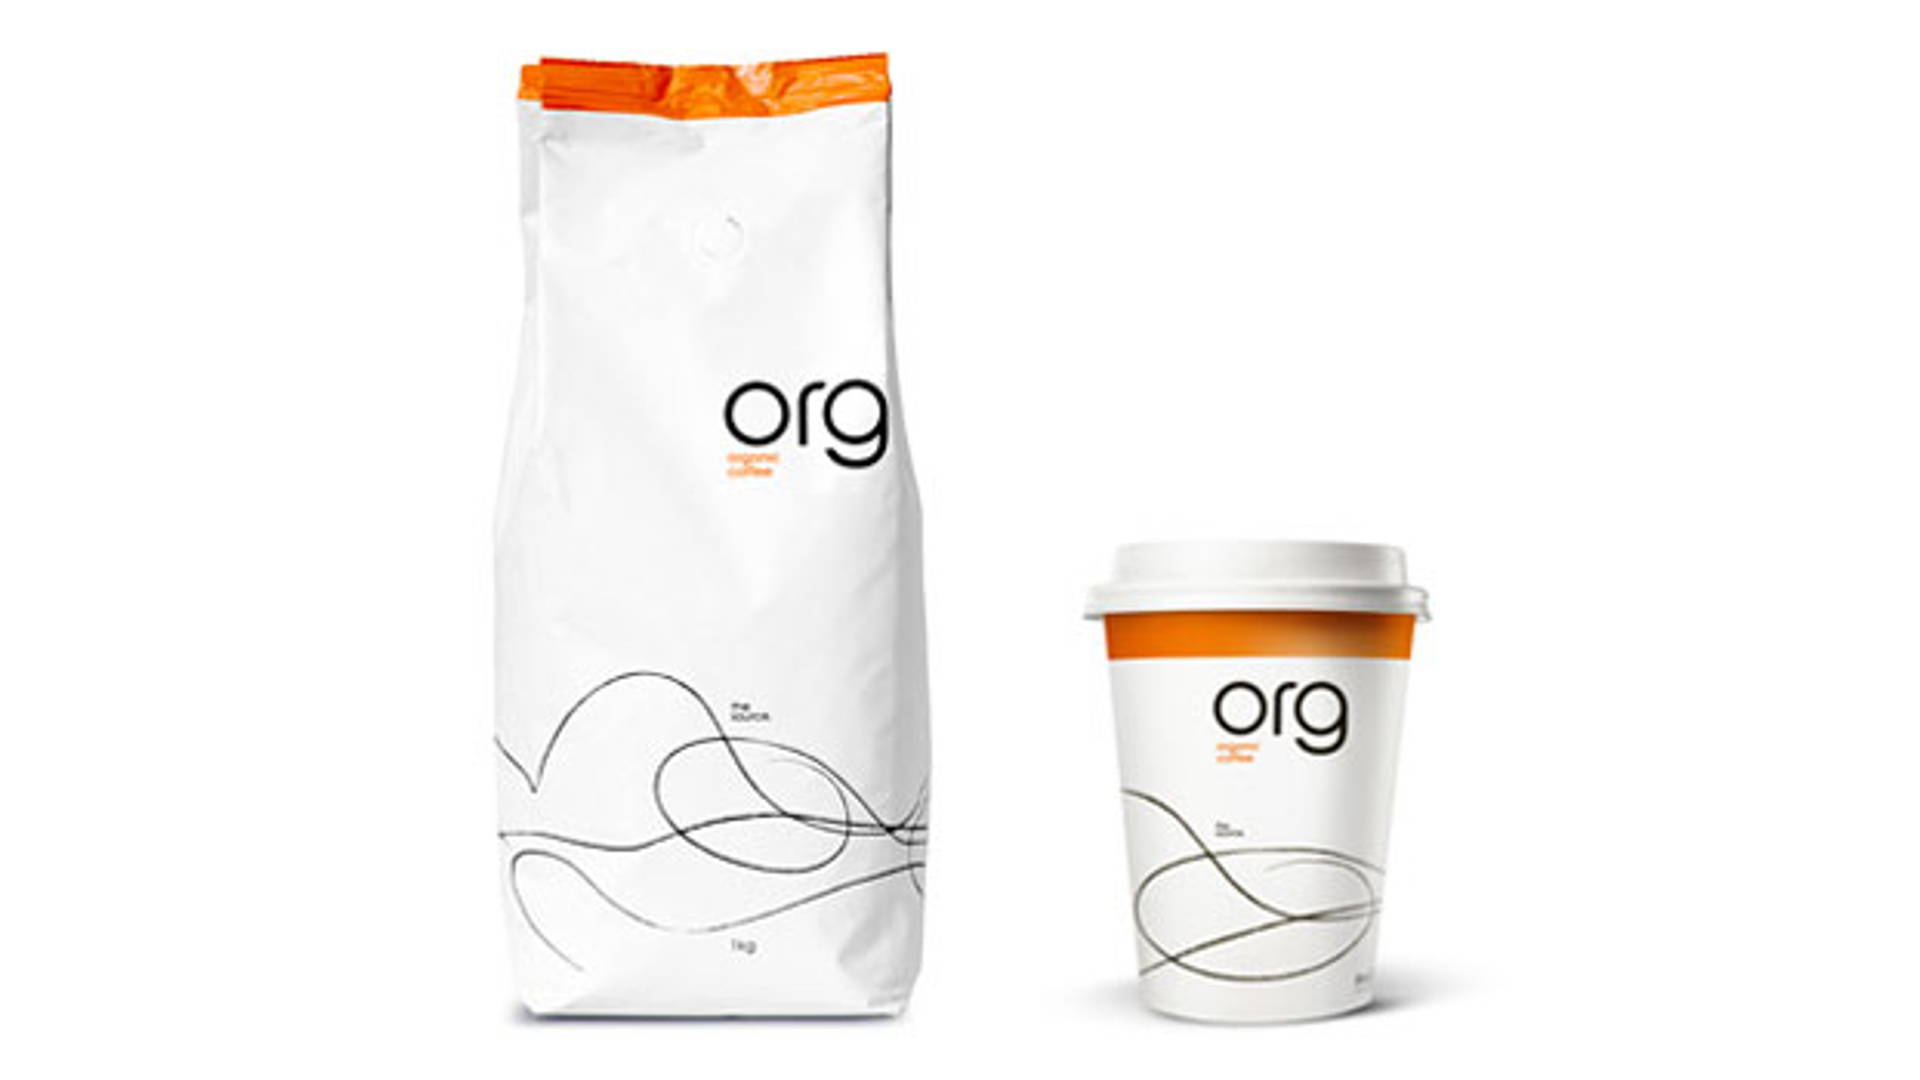 Featured image for Org Organic Coffee 